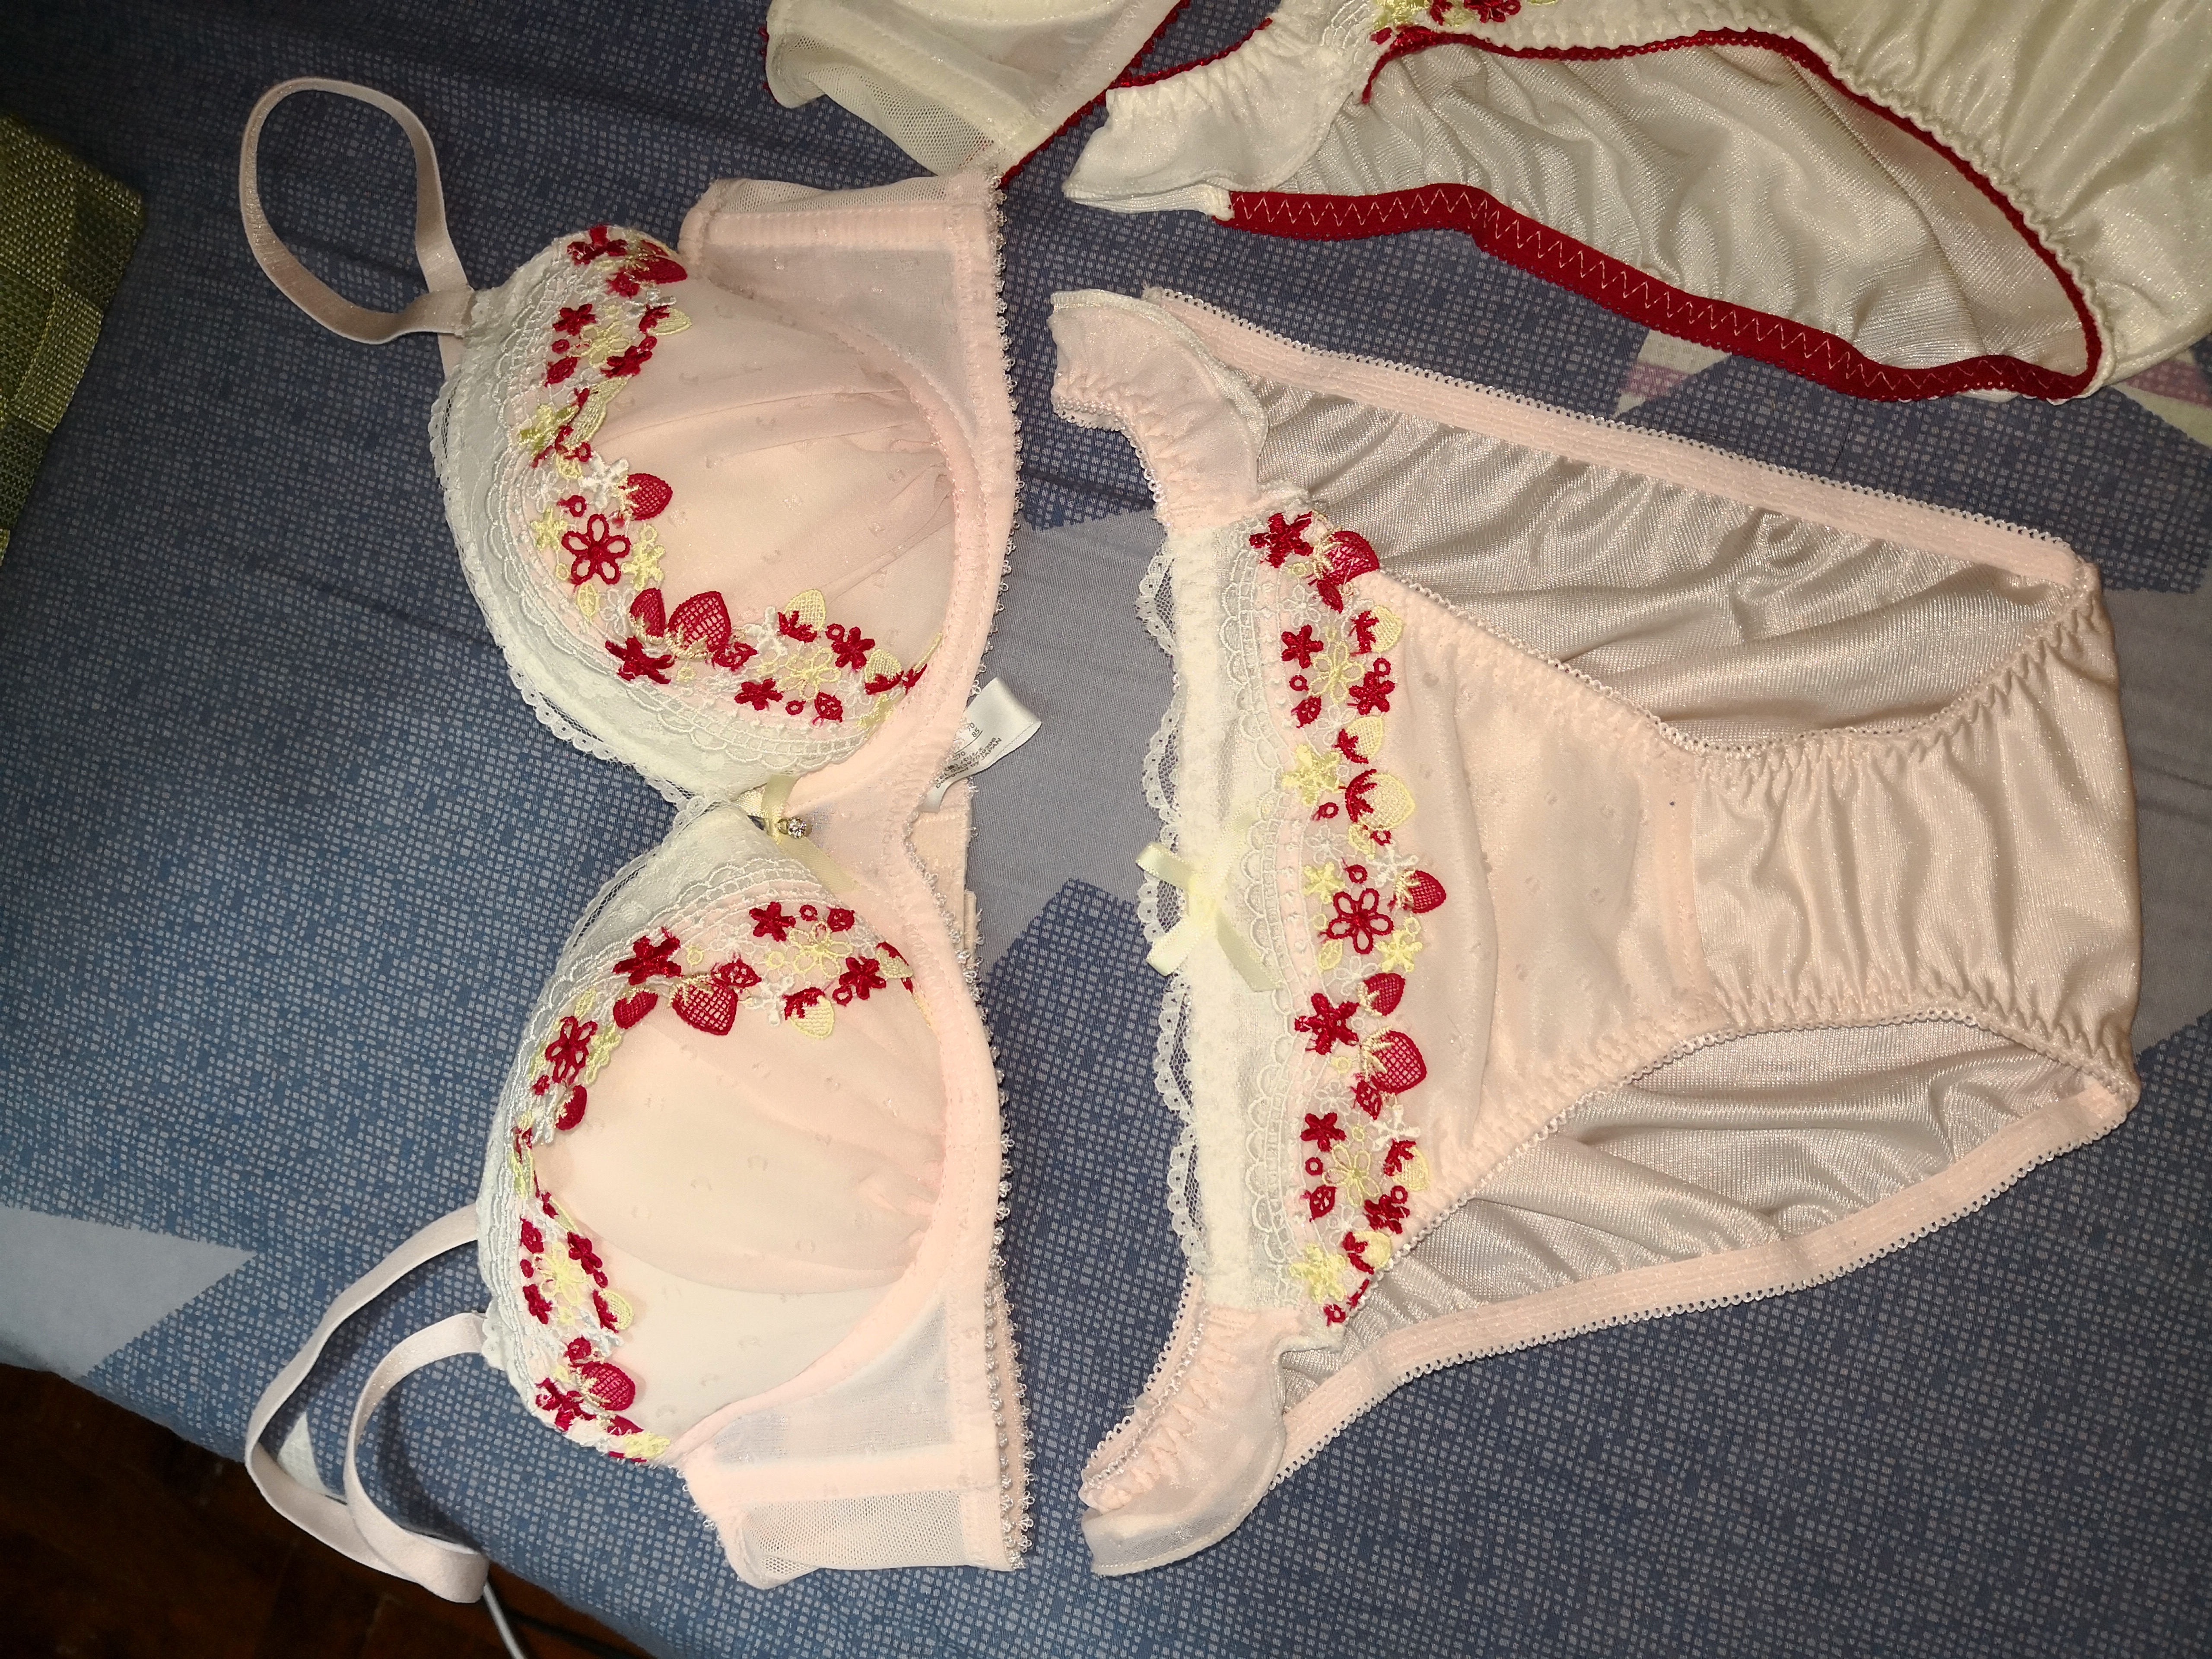 New lovely pink cherry pattern panty is ready to play!